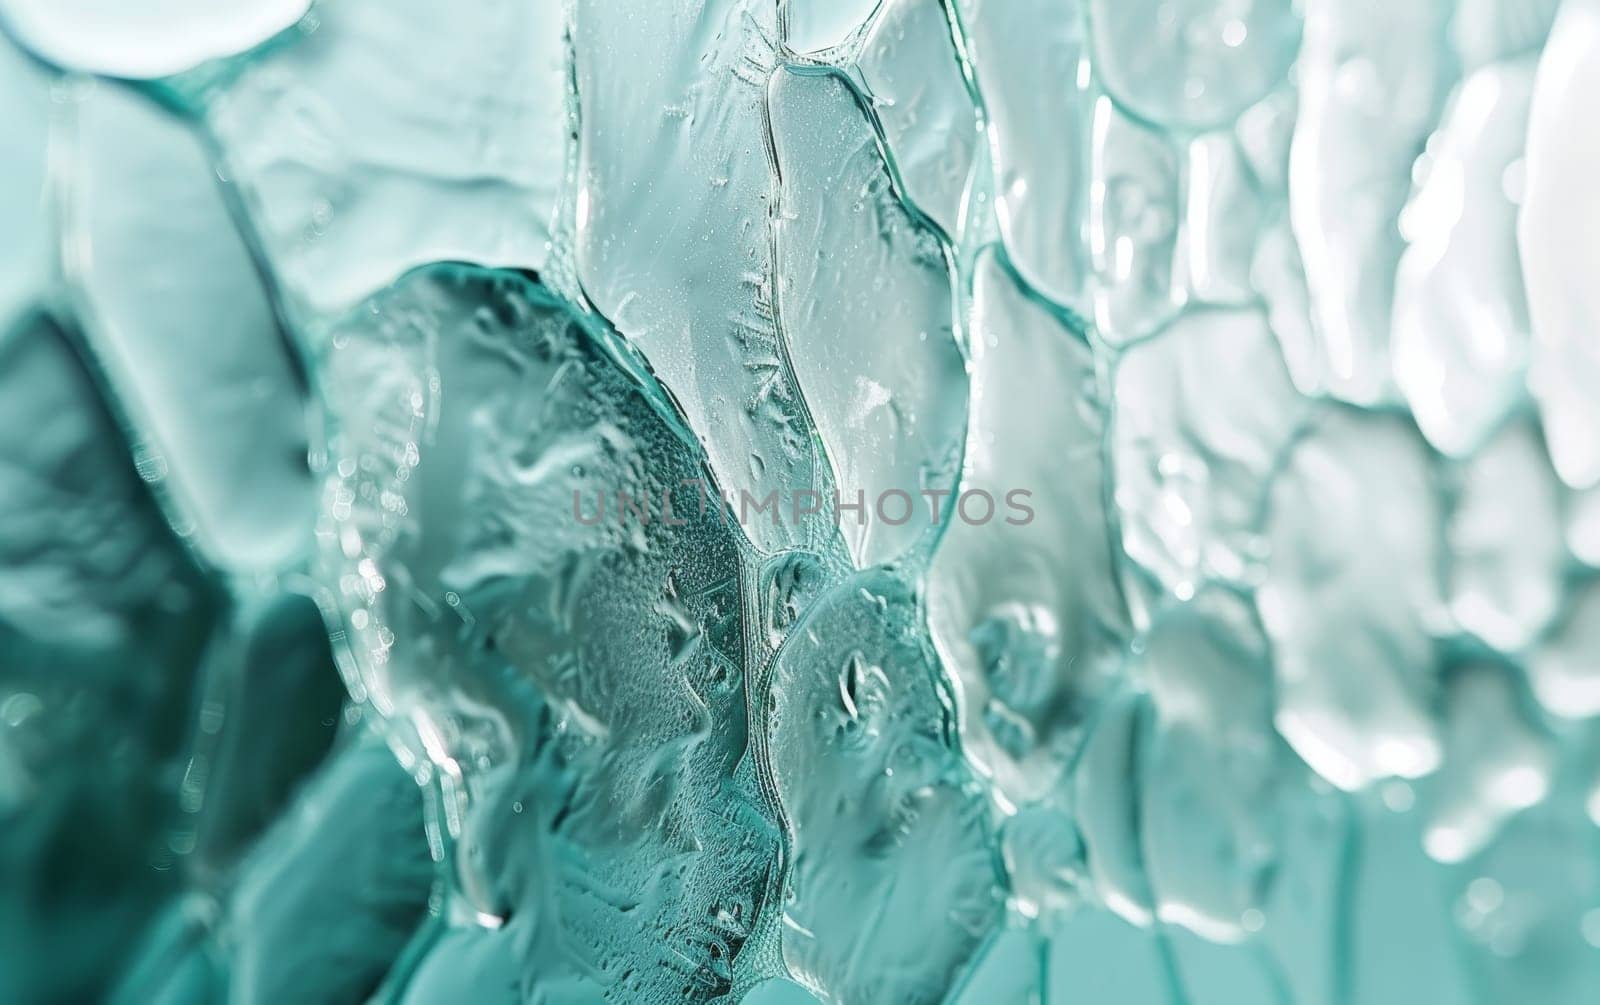 Macro shot of a glass pane with a frozen texture effect and a blend of turquoise and white hues.